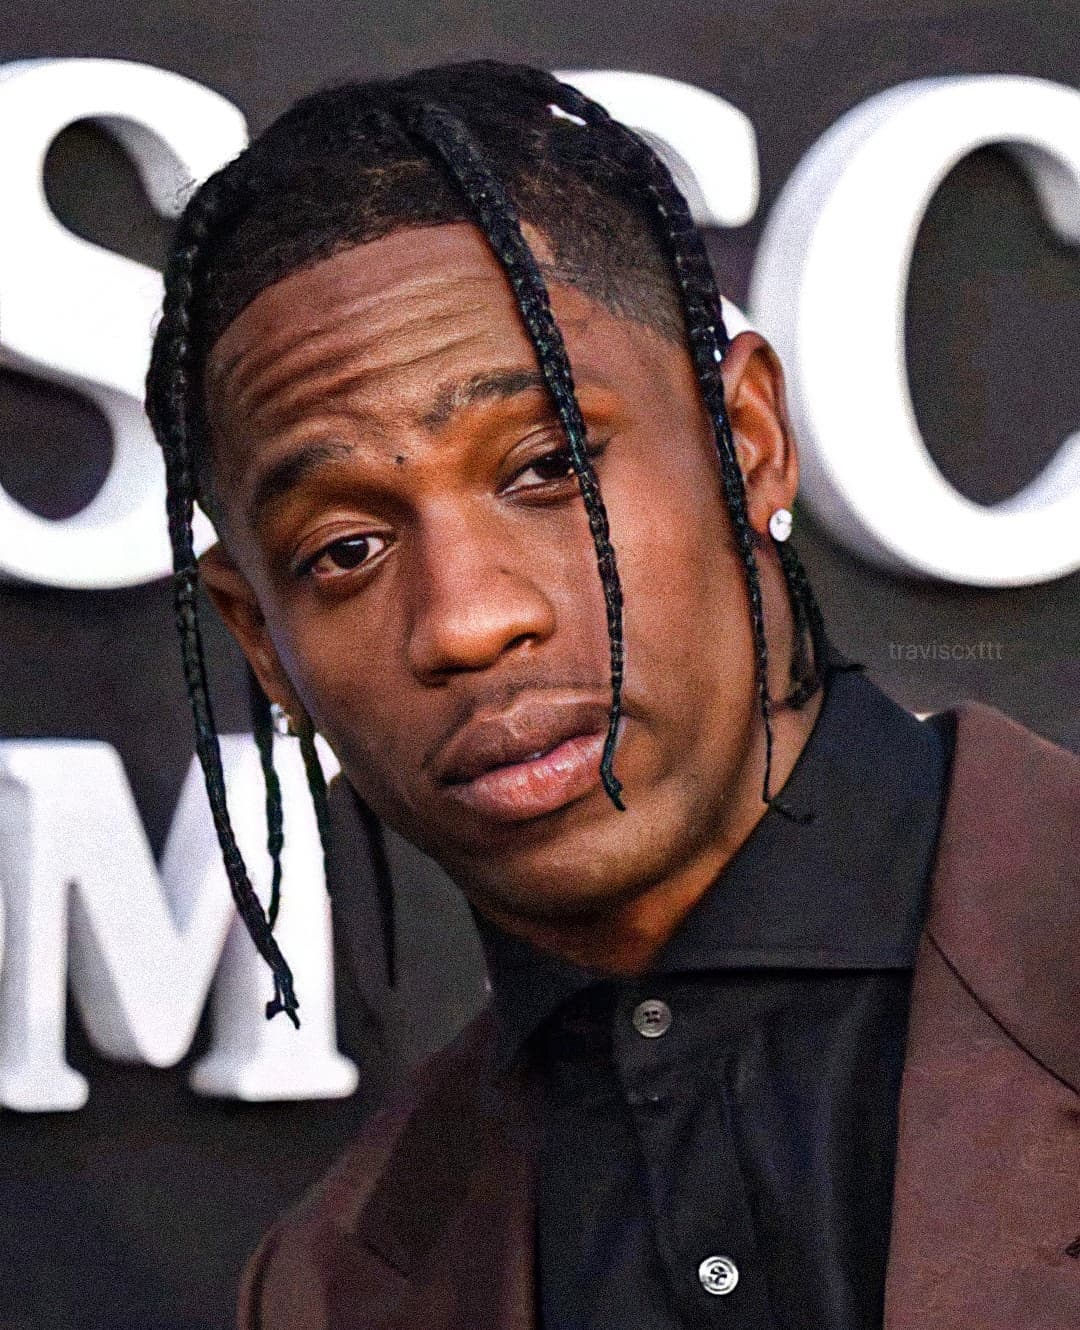 Travis Scott West Age, Height, Wife, Family – Biographyprofiles